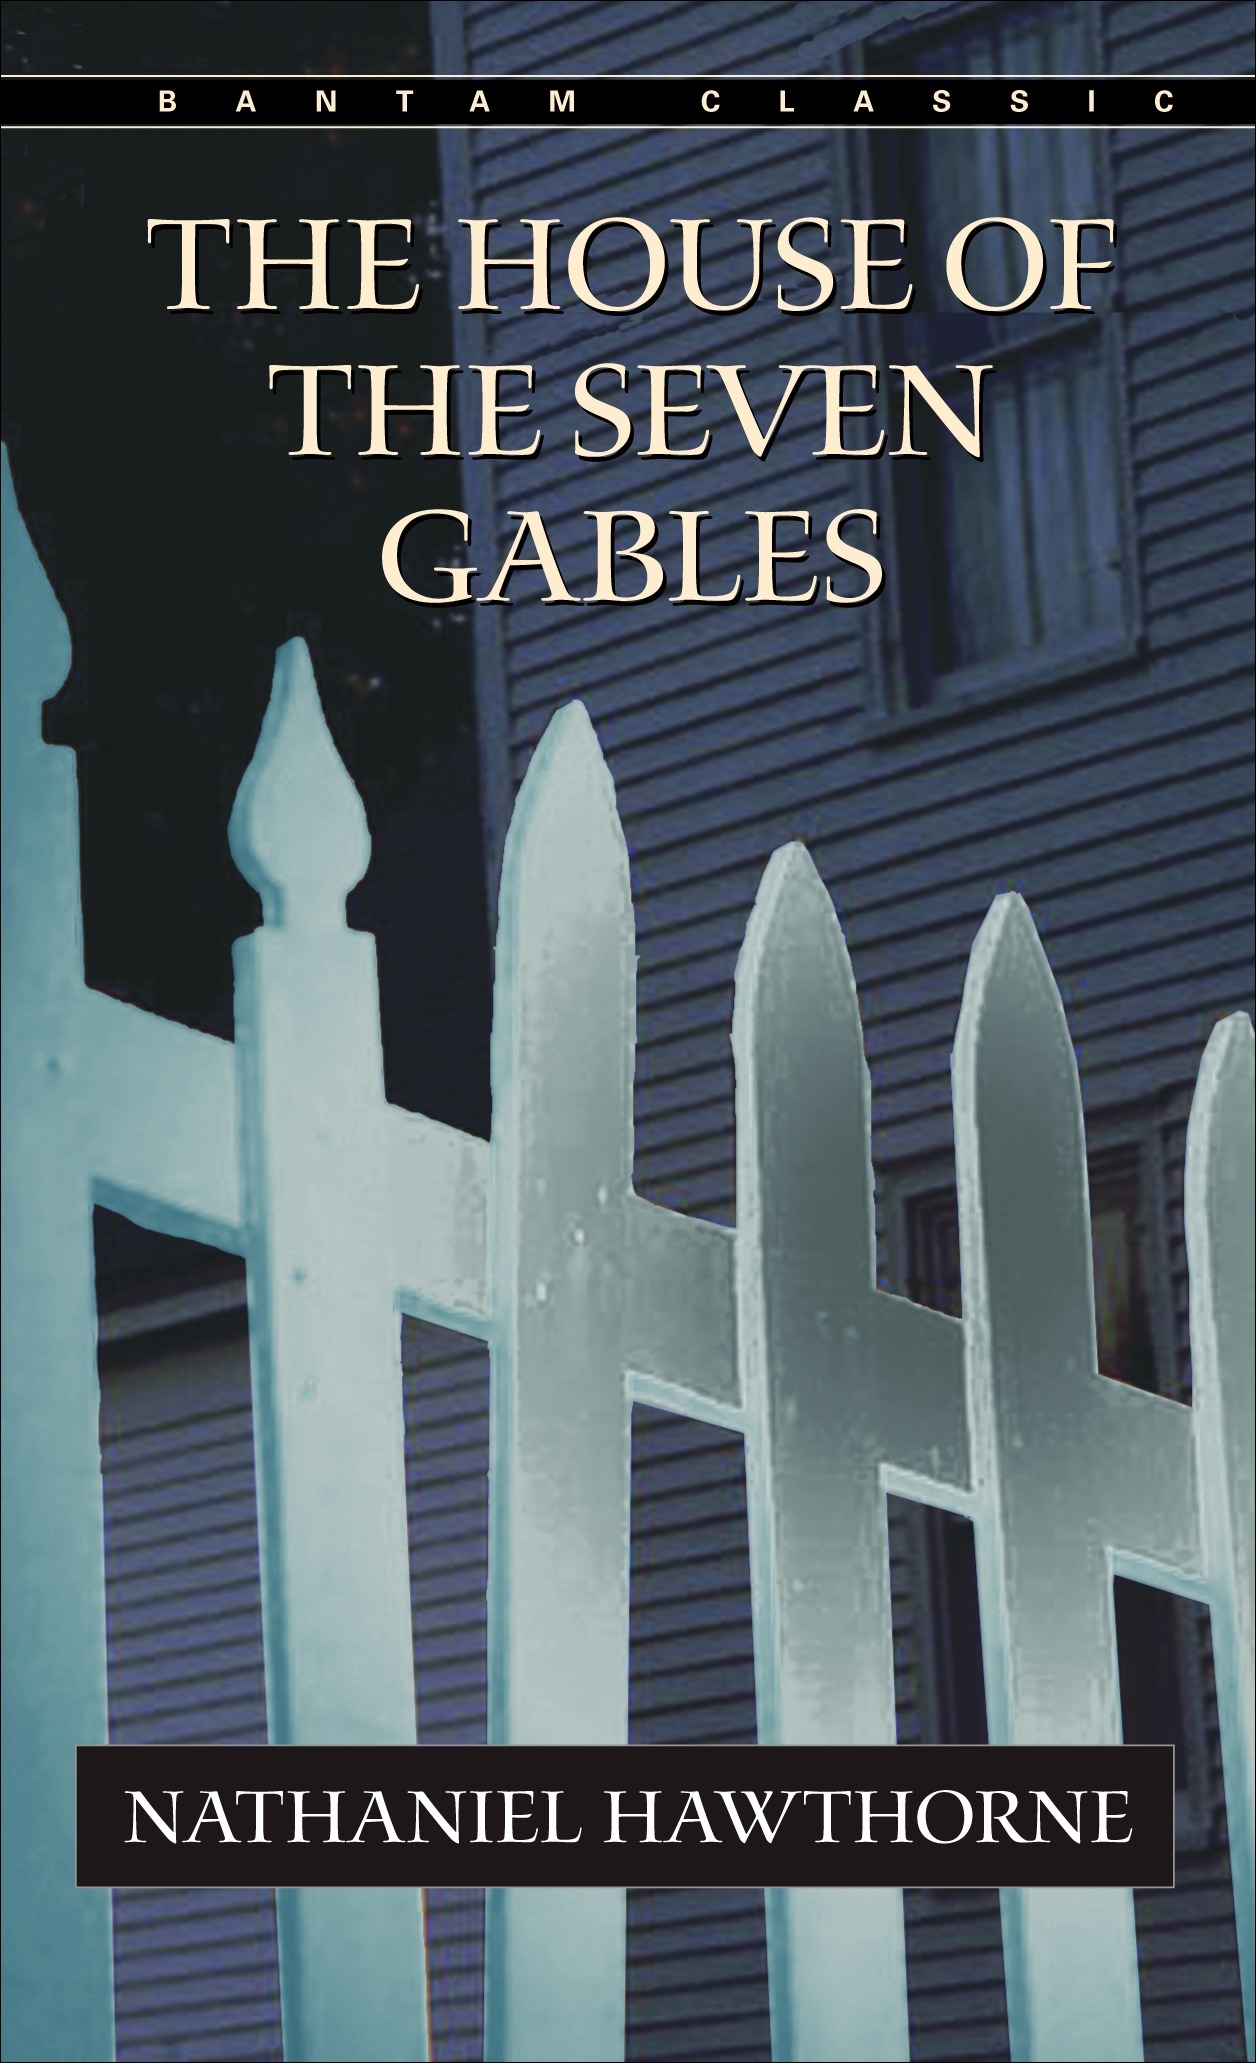 the house of the seven gables book